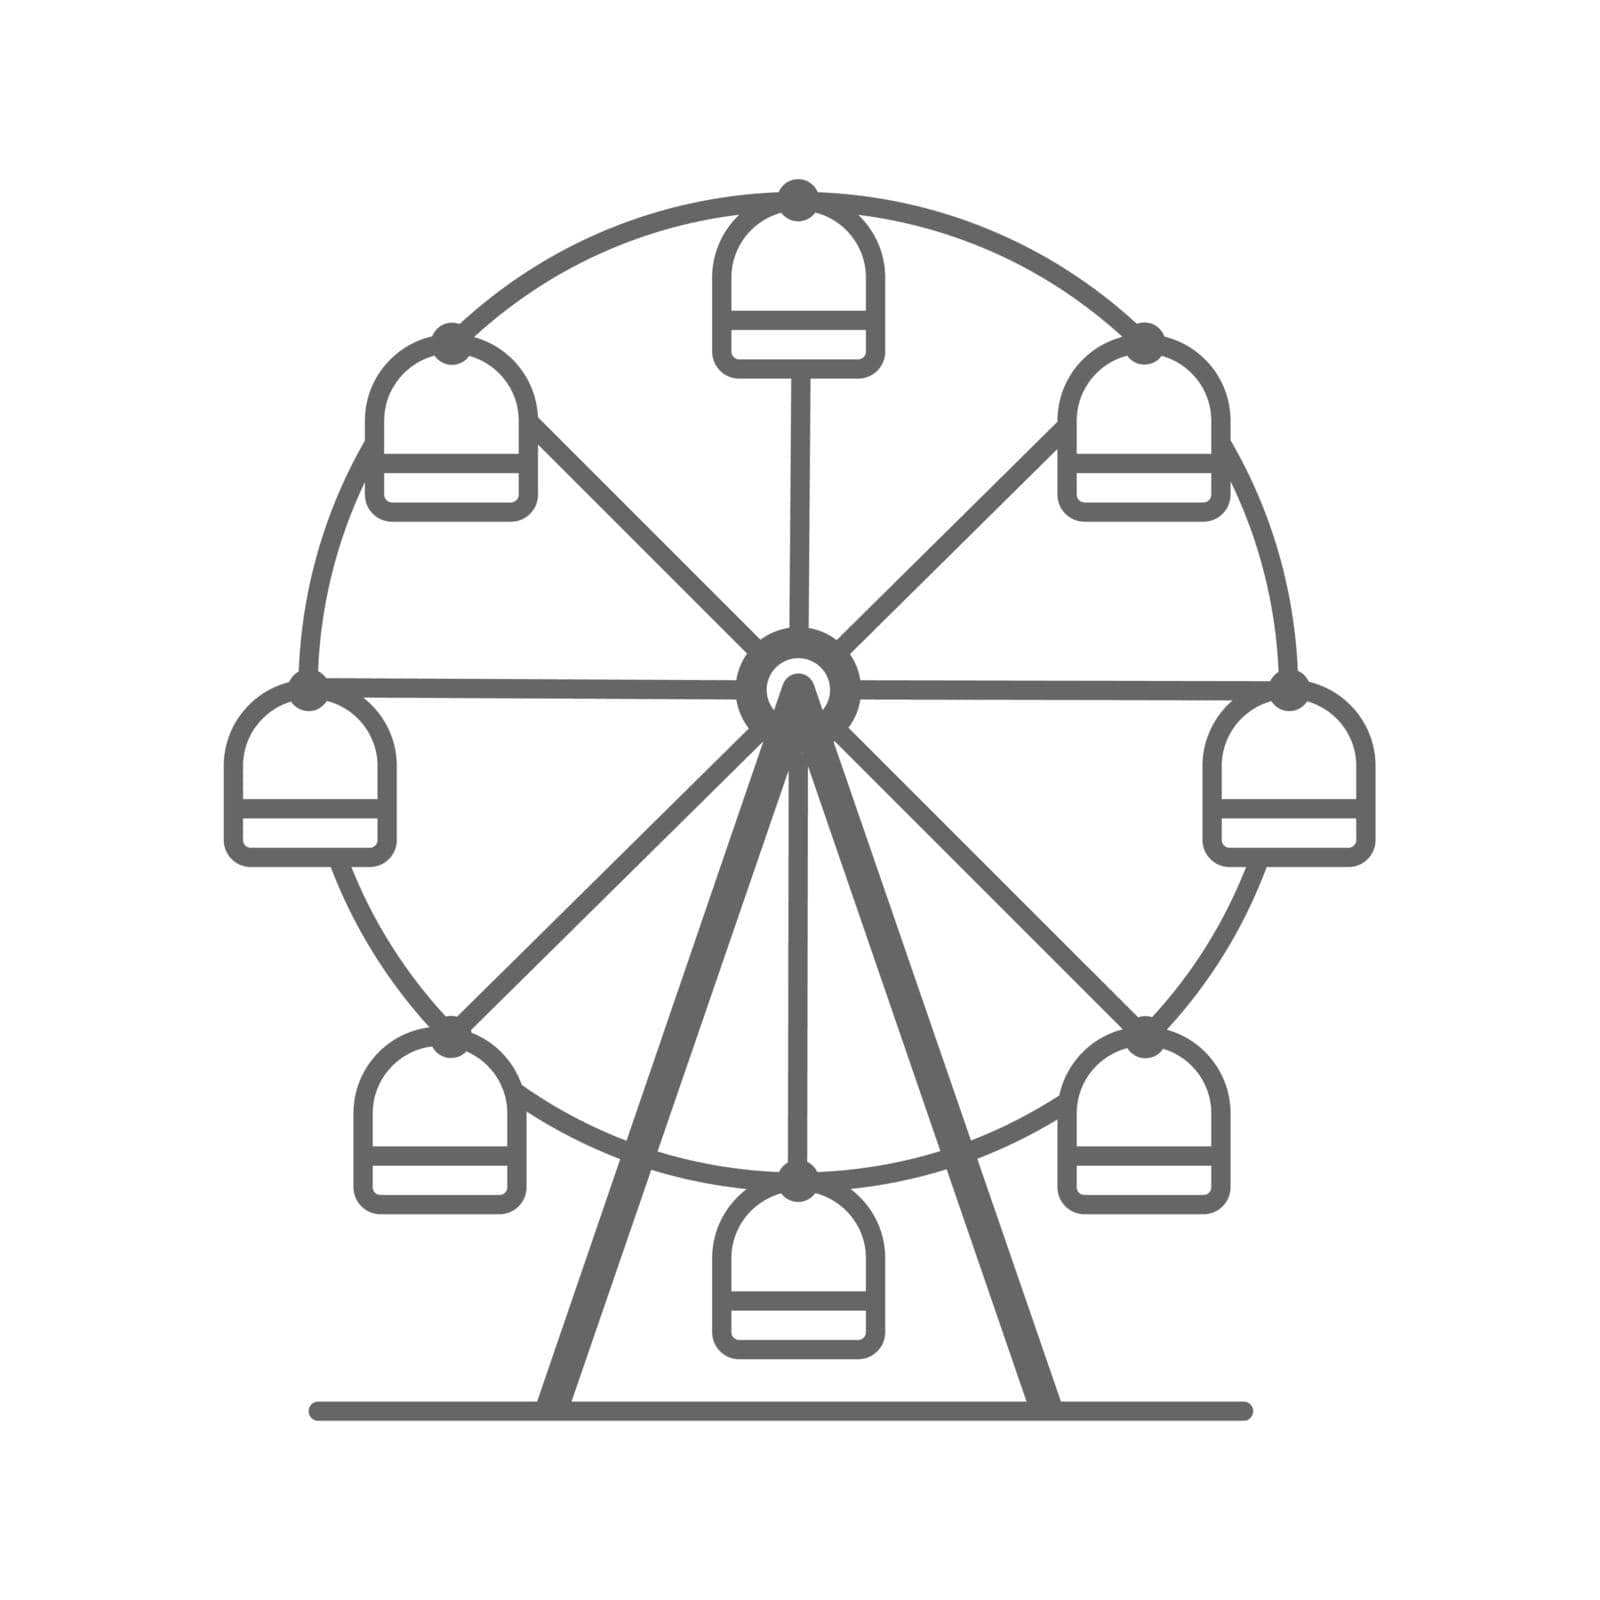 Ferris wheel icon in an amusement park. Vector illustration isolated on a white background.